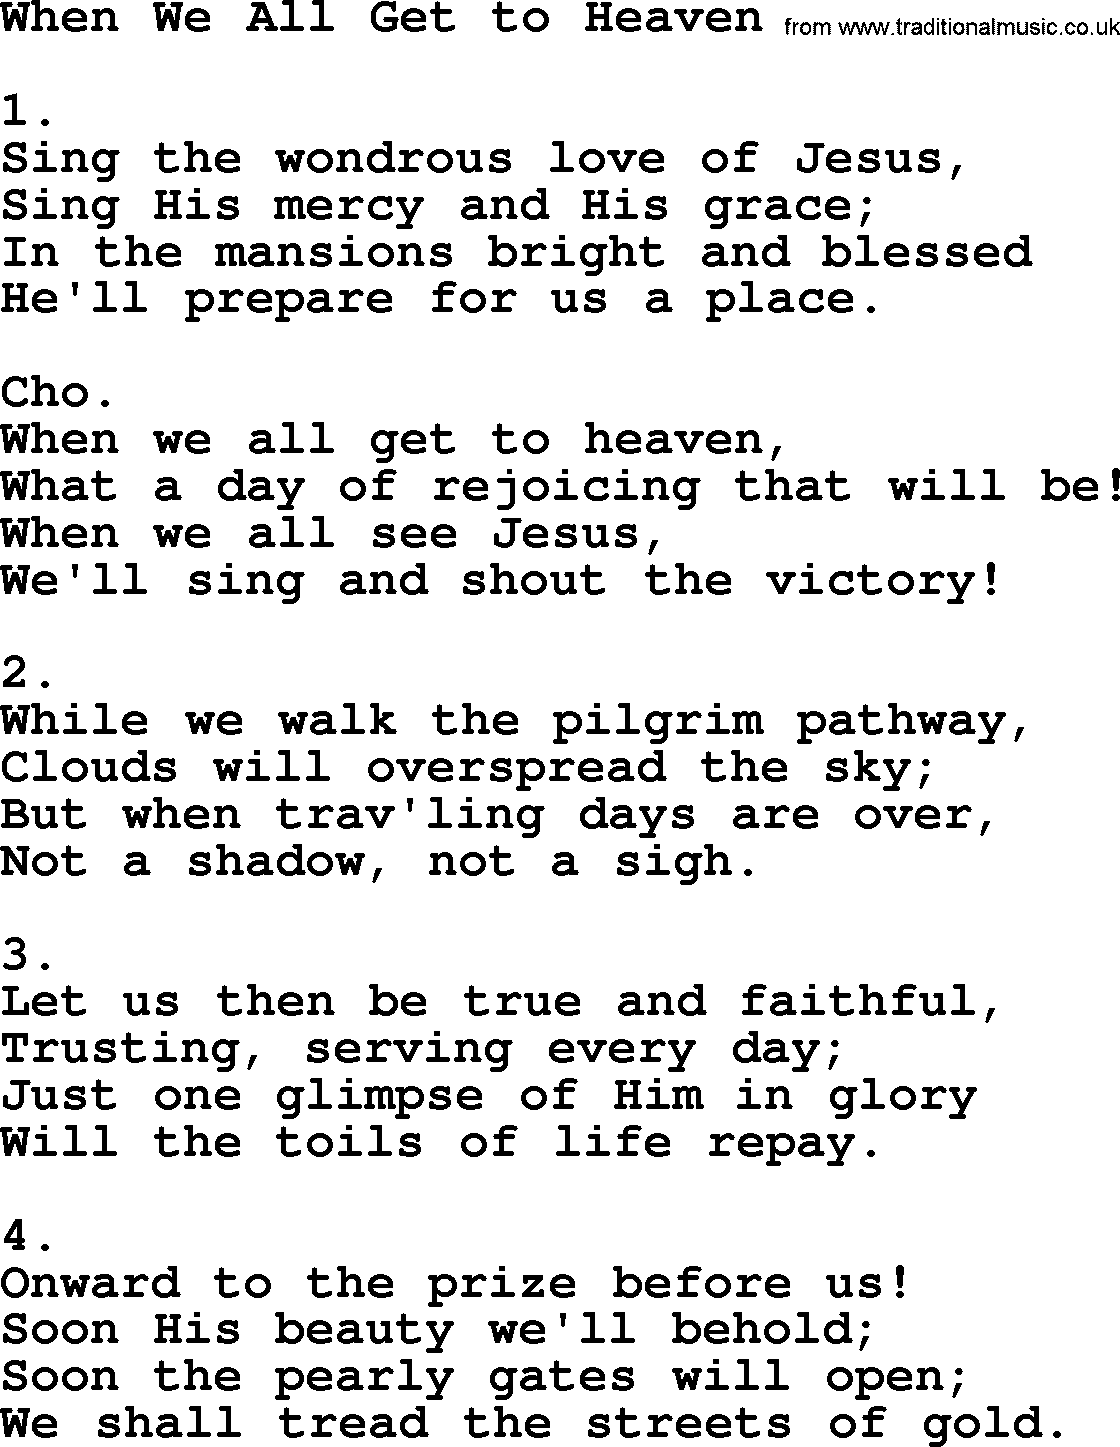 Apostolic & Pentecostal Hymns and Songs, Hymn: When We All Get to Heaven lyrics and PDF